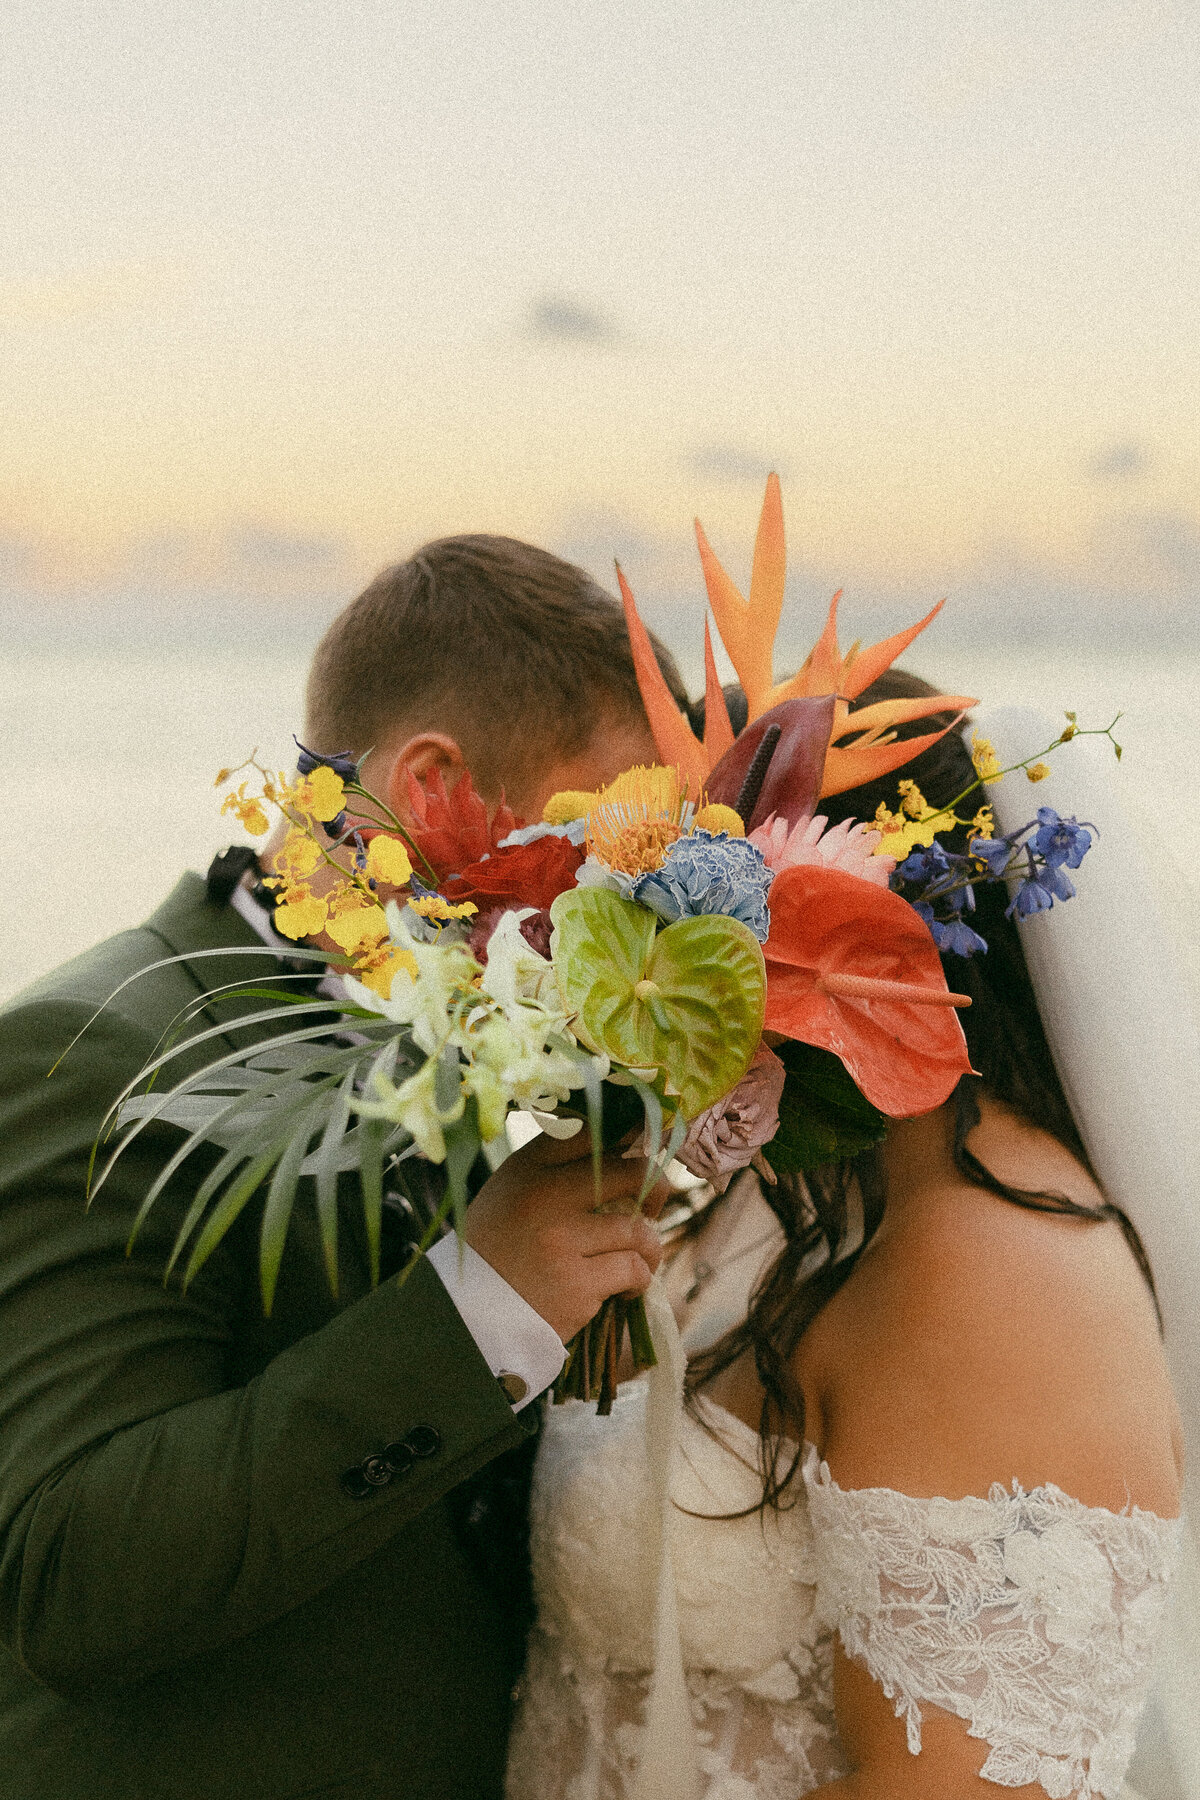 A person holding up a bouquet of flowers over their face as they kiss someone.